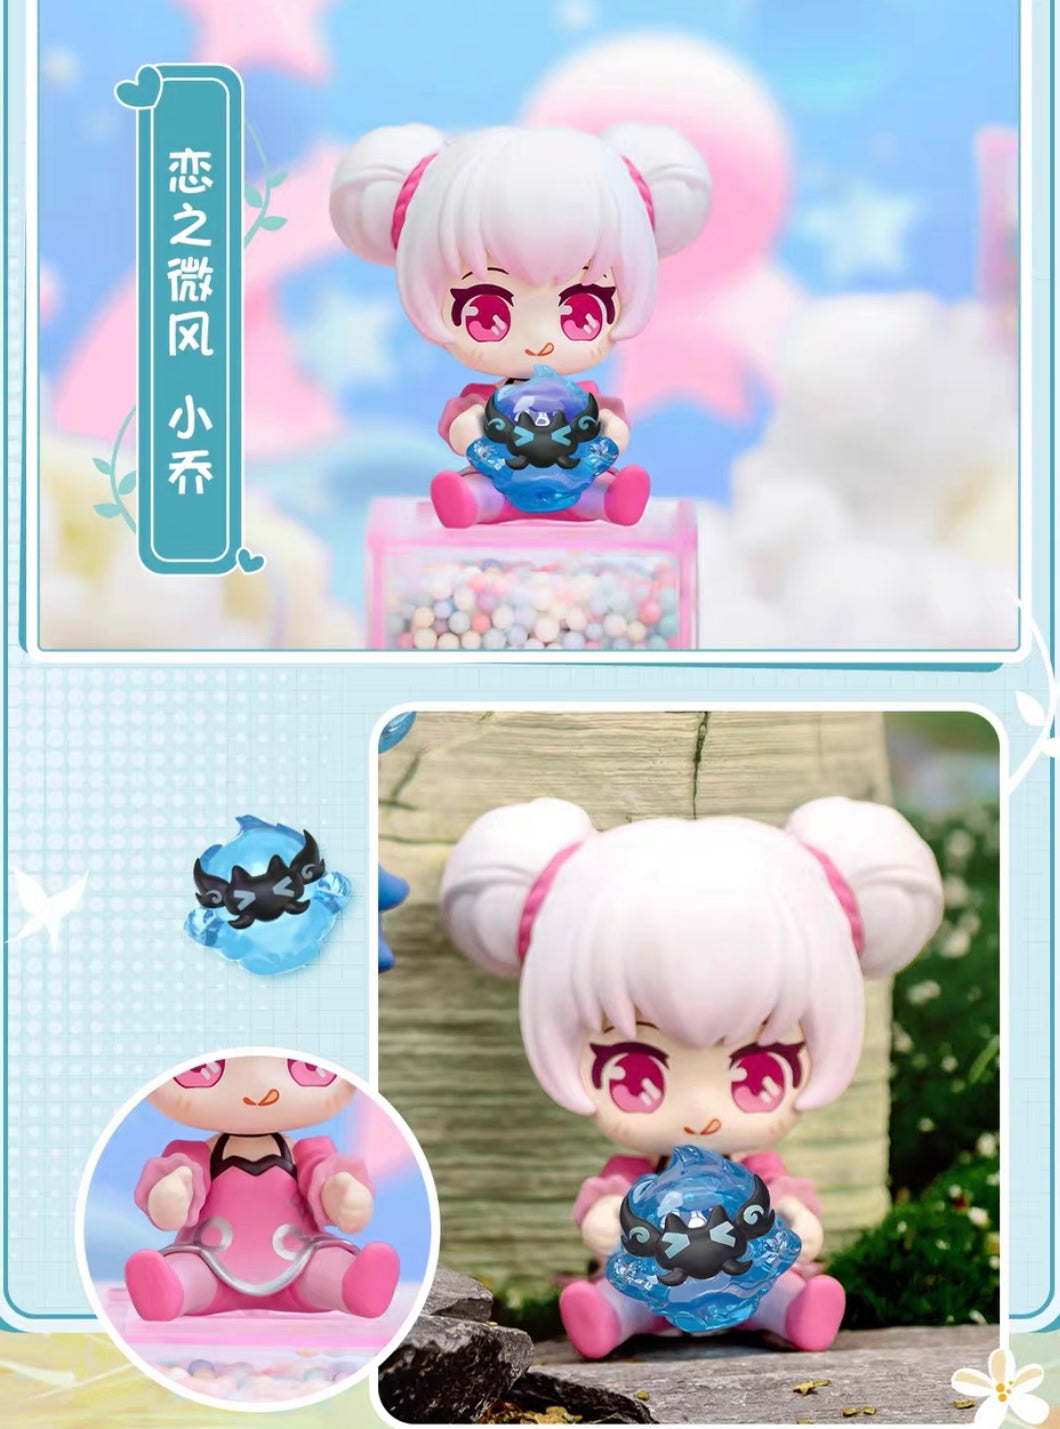 【SALE】Honor king hug series 2-only green hair girl and 2 boys left now